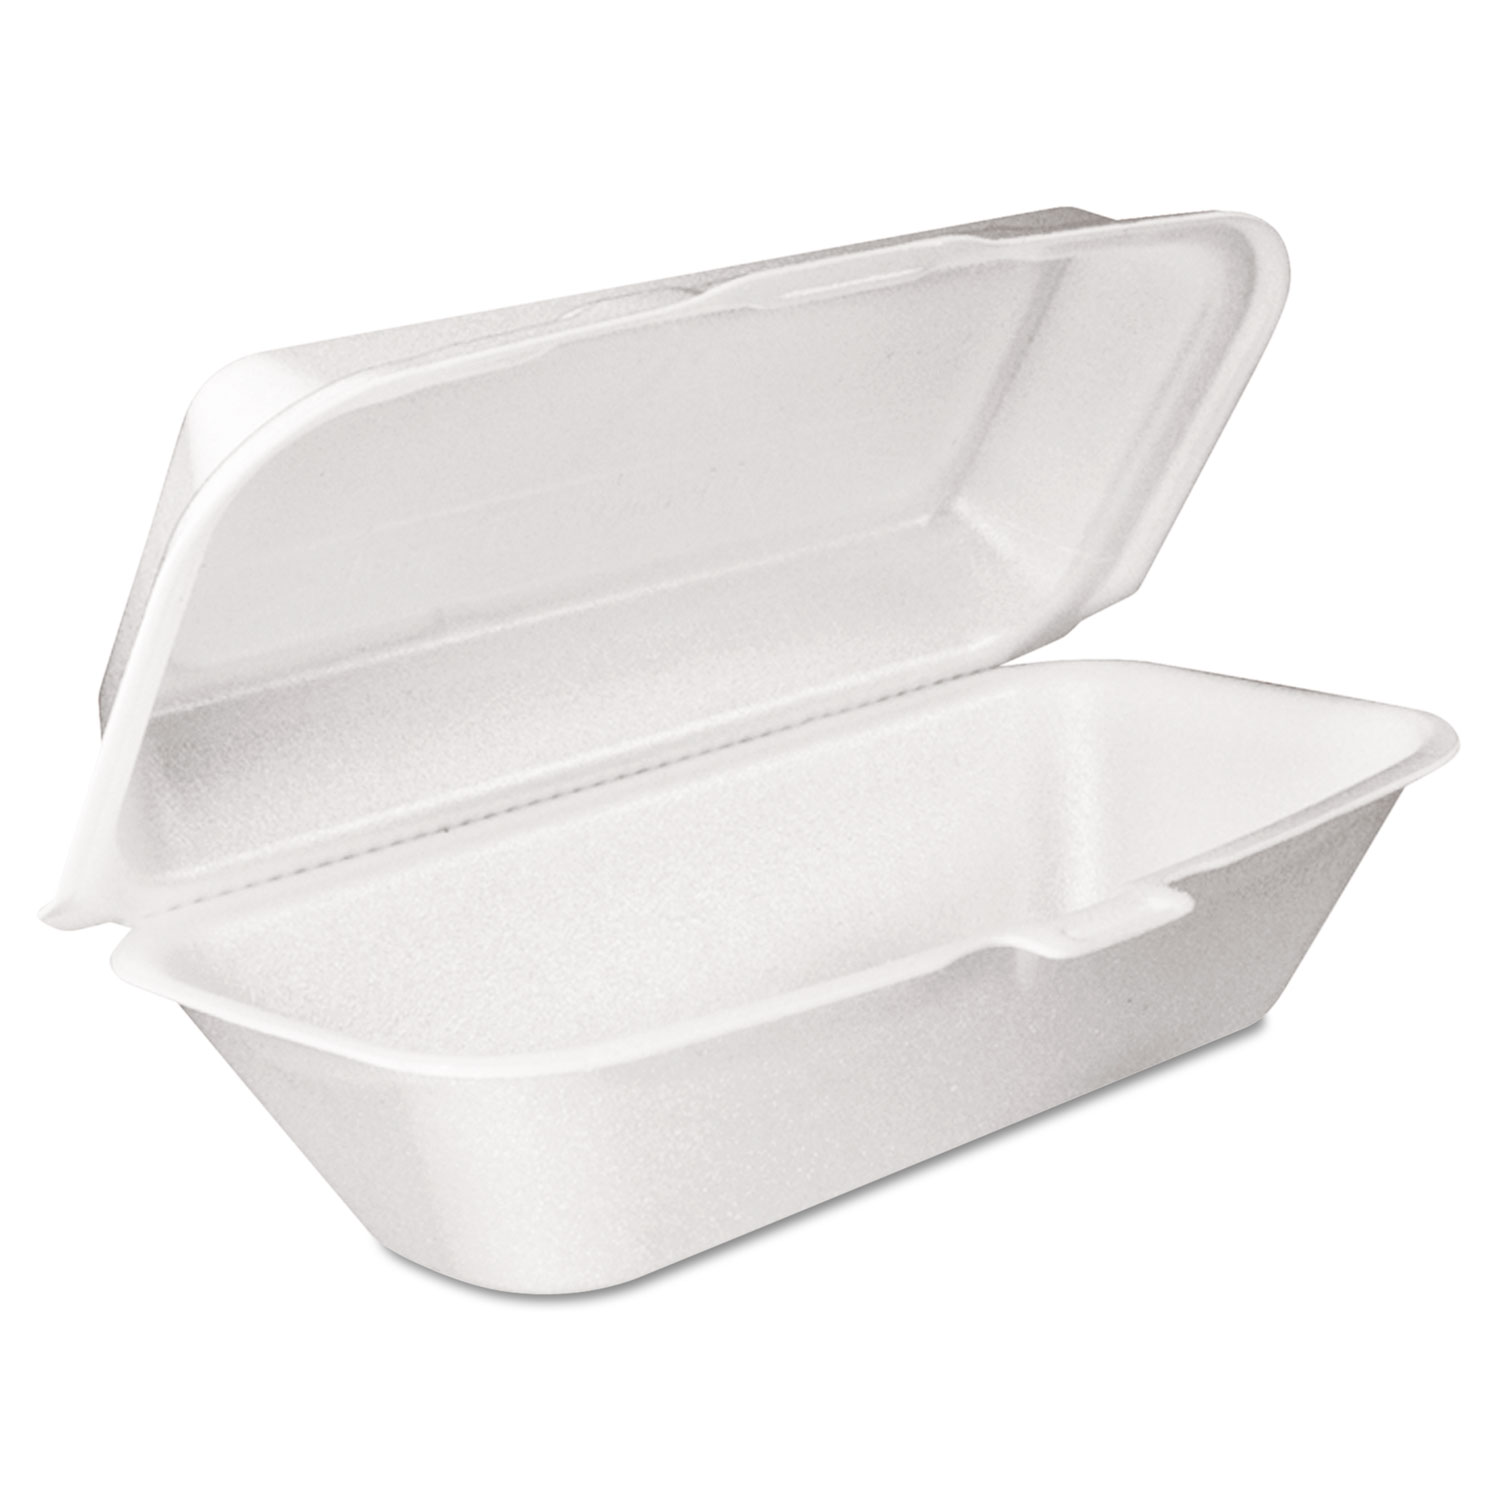  Dart 99HT1R Foam Hoagie Container with Removable Lid, 9-4/5x5-3/10x3-3/10, White, 125/Bag (DCC99HT1R) 